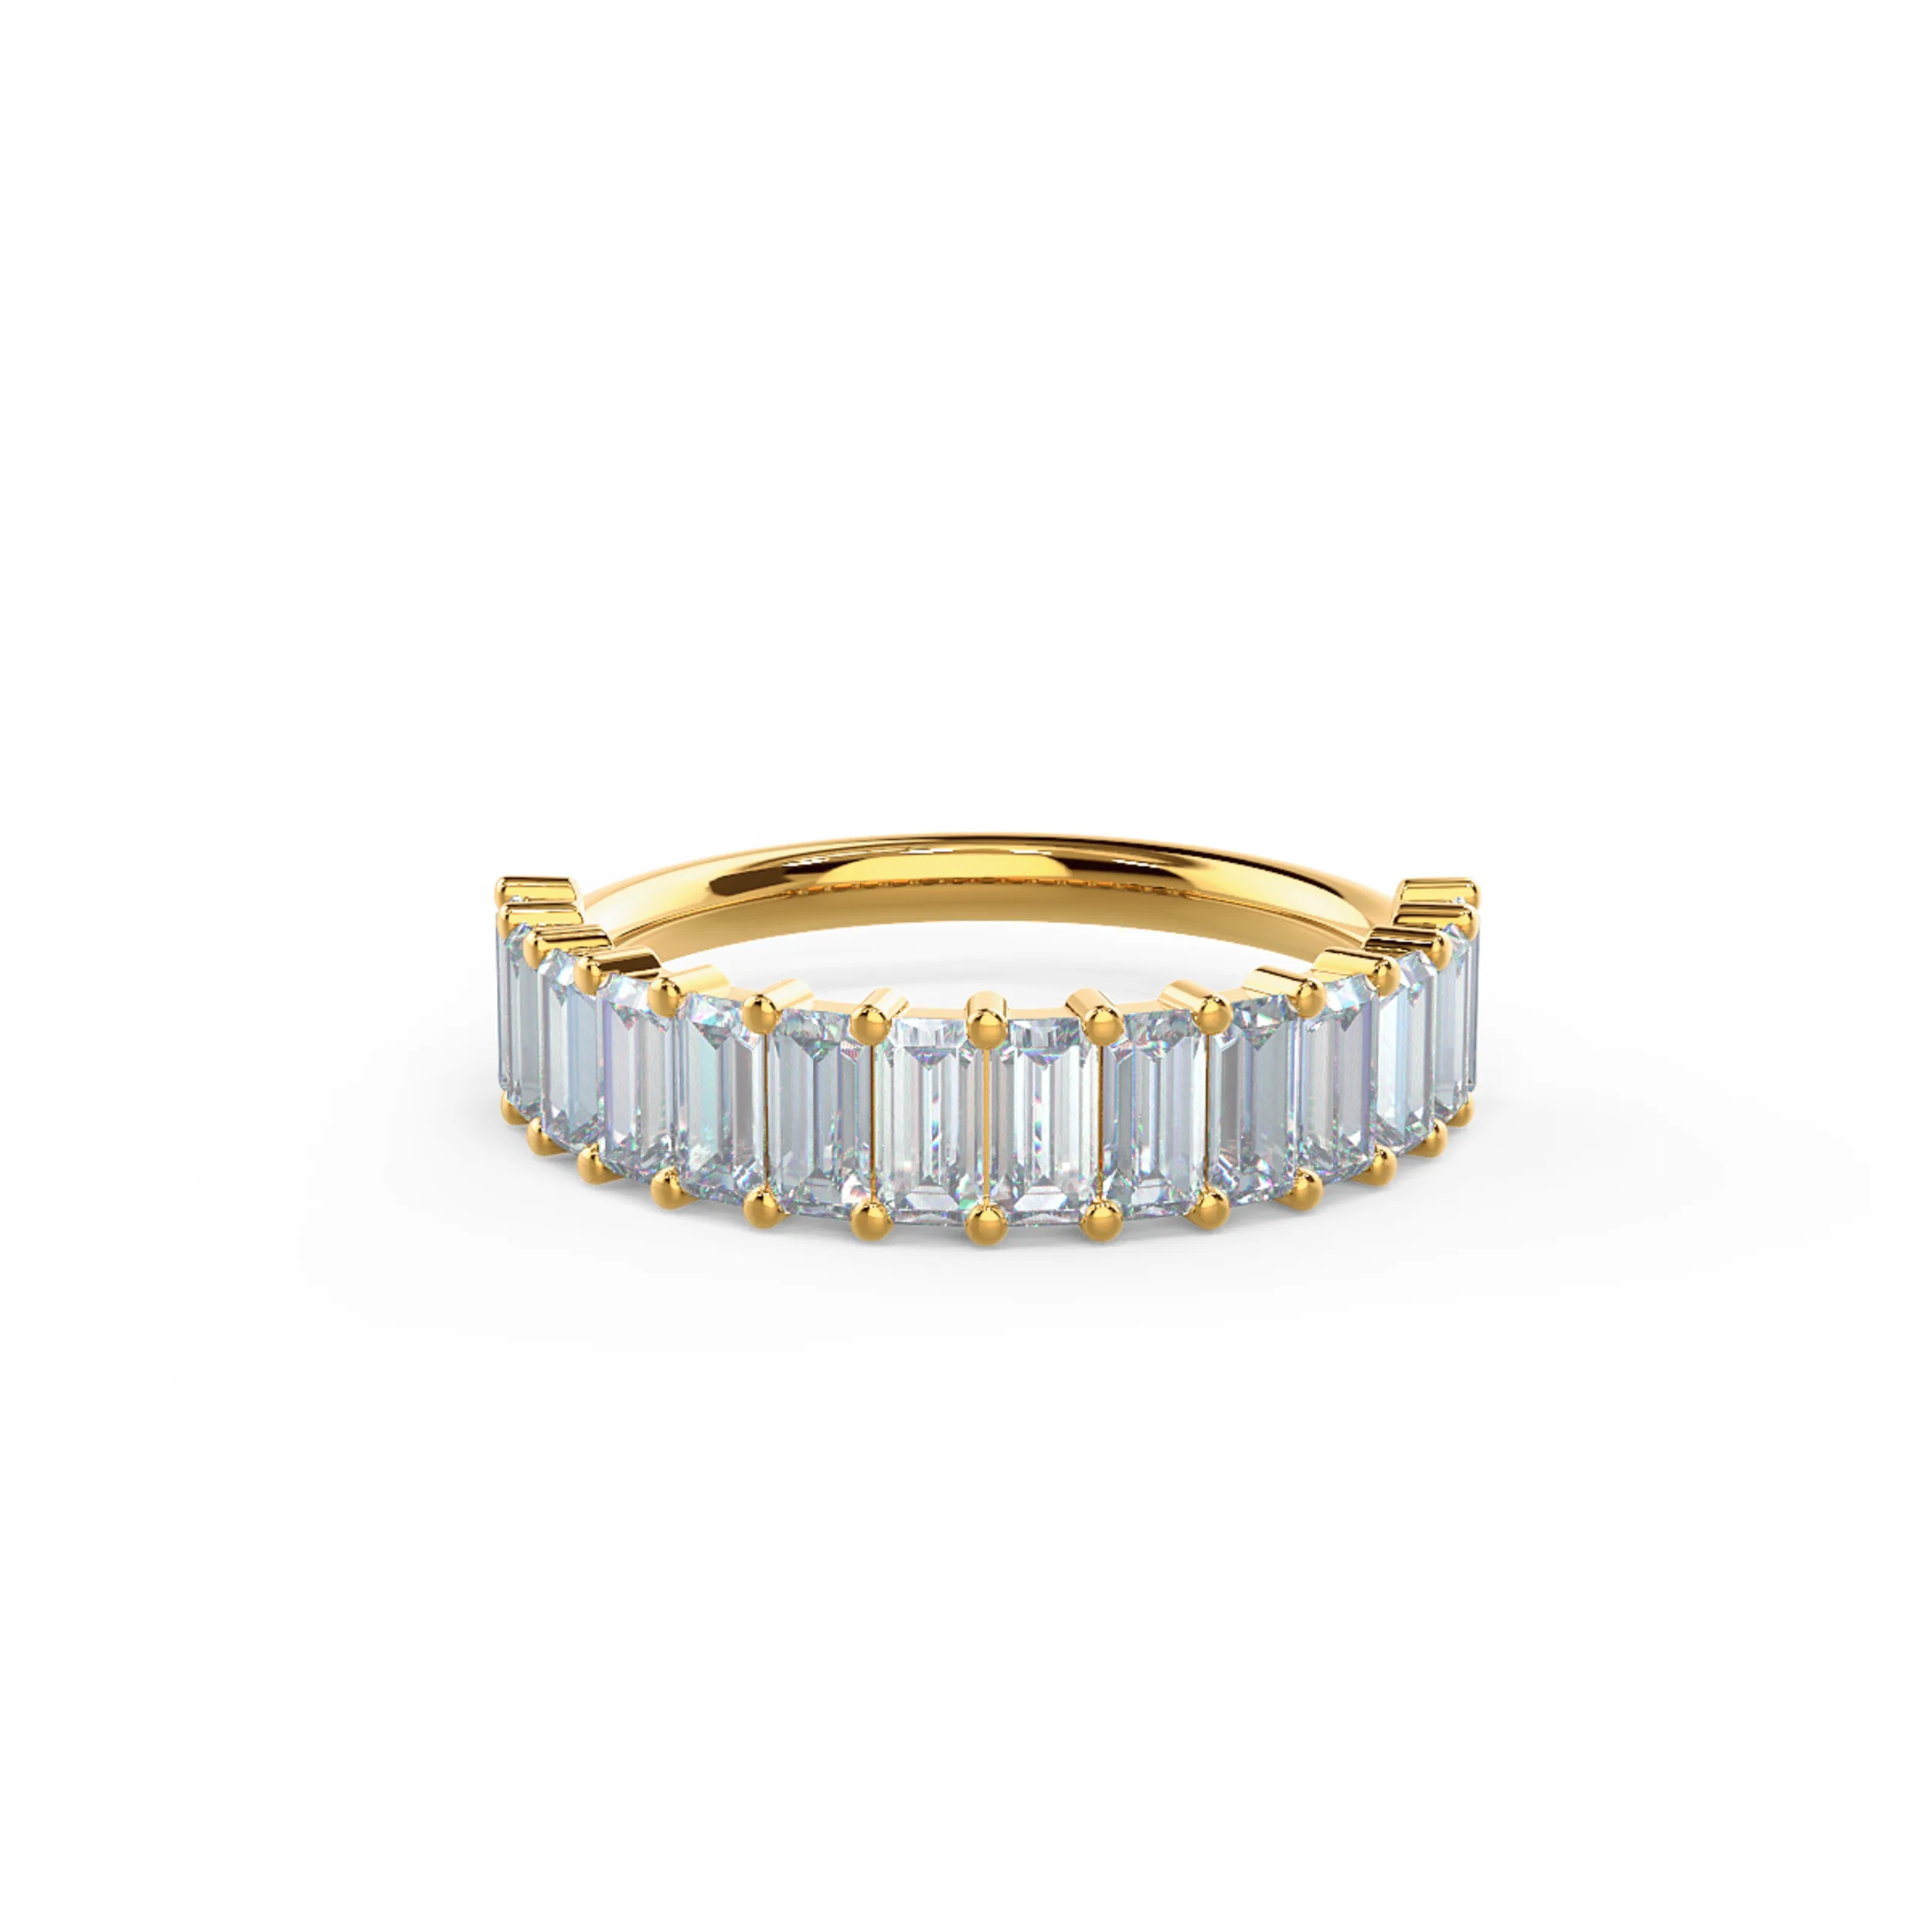 High Quality 1.4 ct Man Made Diamonds set in 18k Yellow Gold Baguette Diamond Half Eternity Band (Main View)